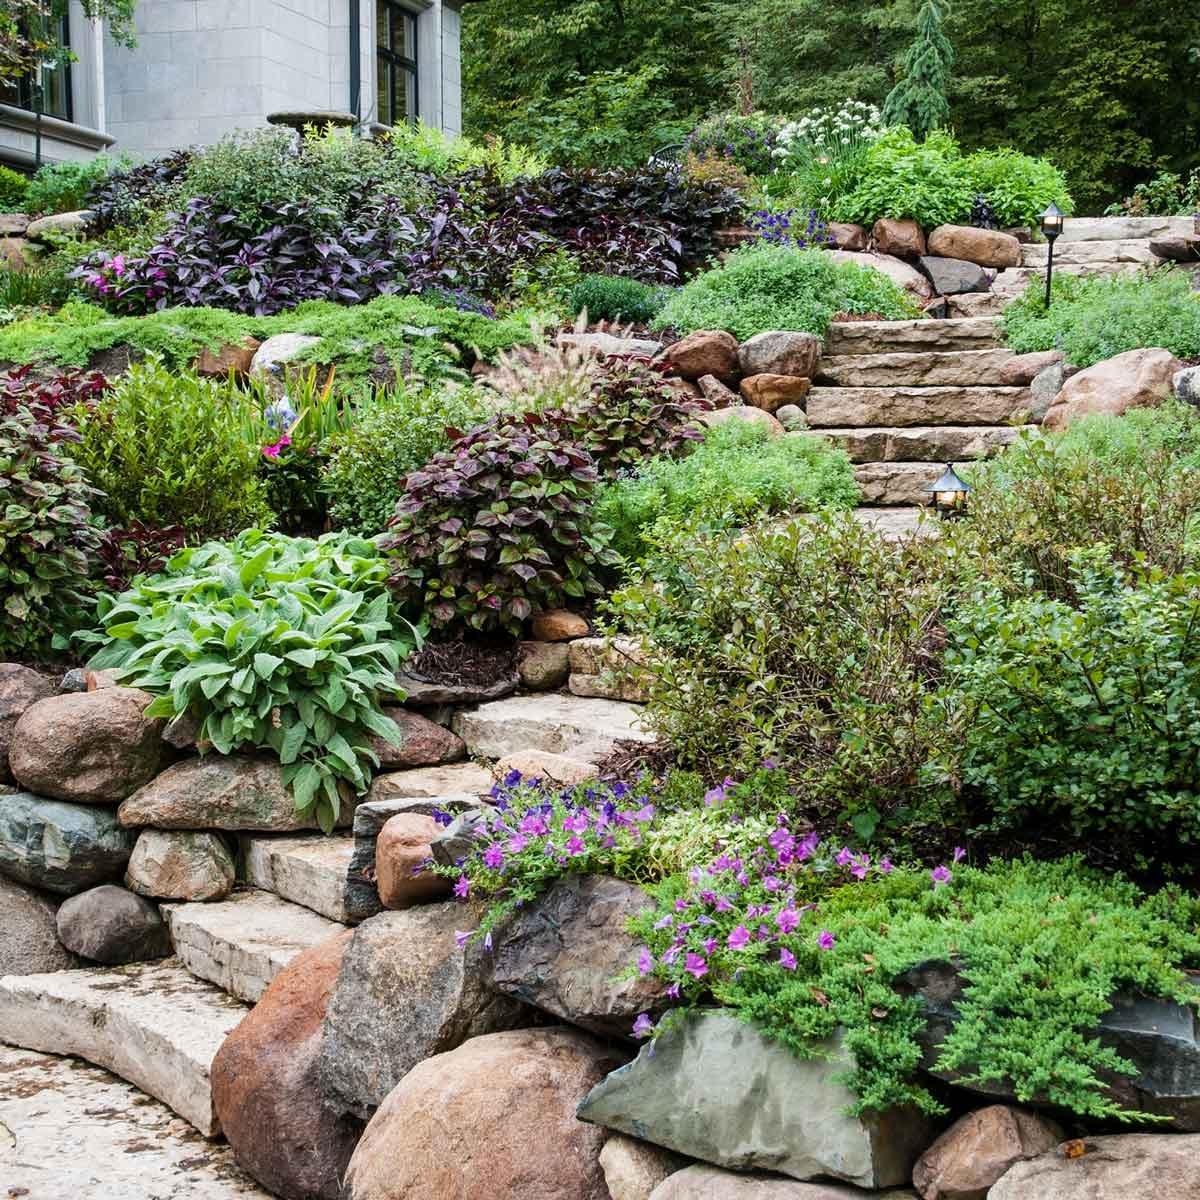 How to Glue Rocks Together for Landscaping: 4 Easy Methods